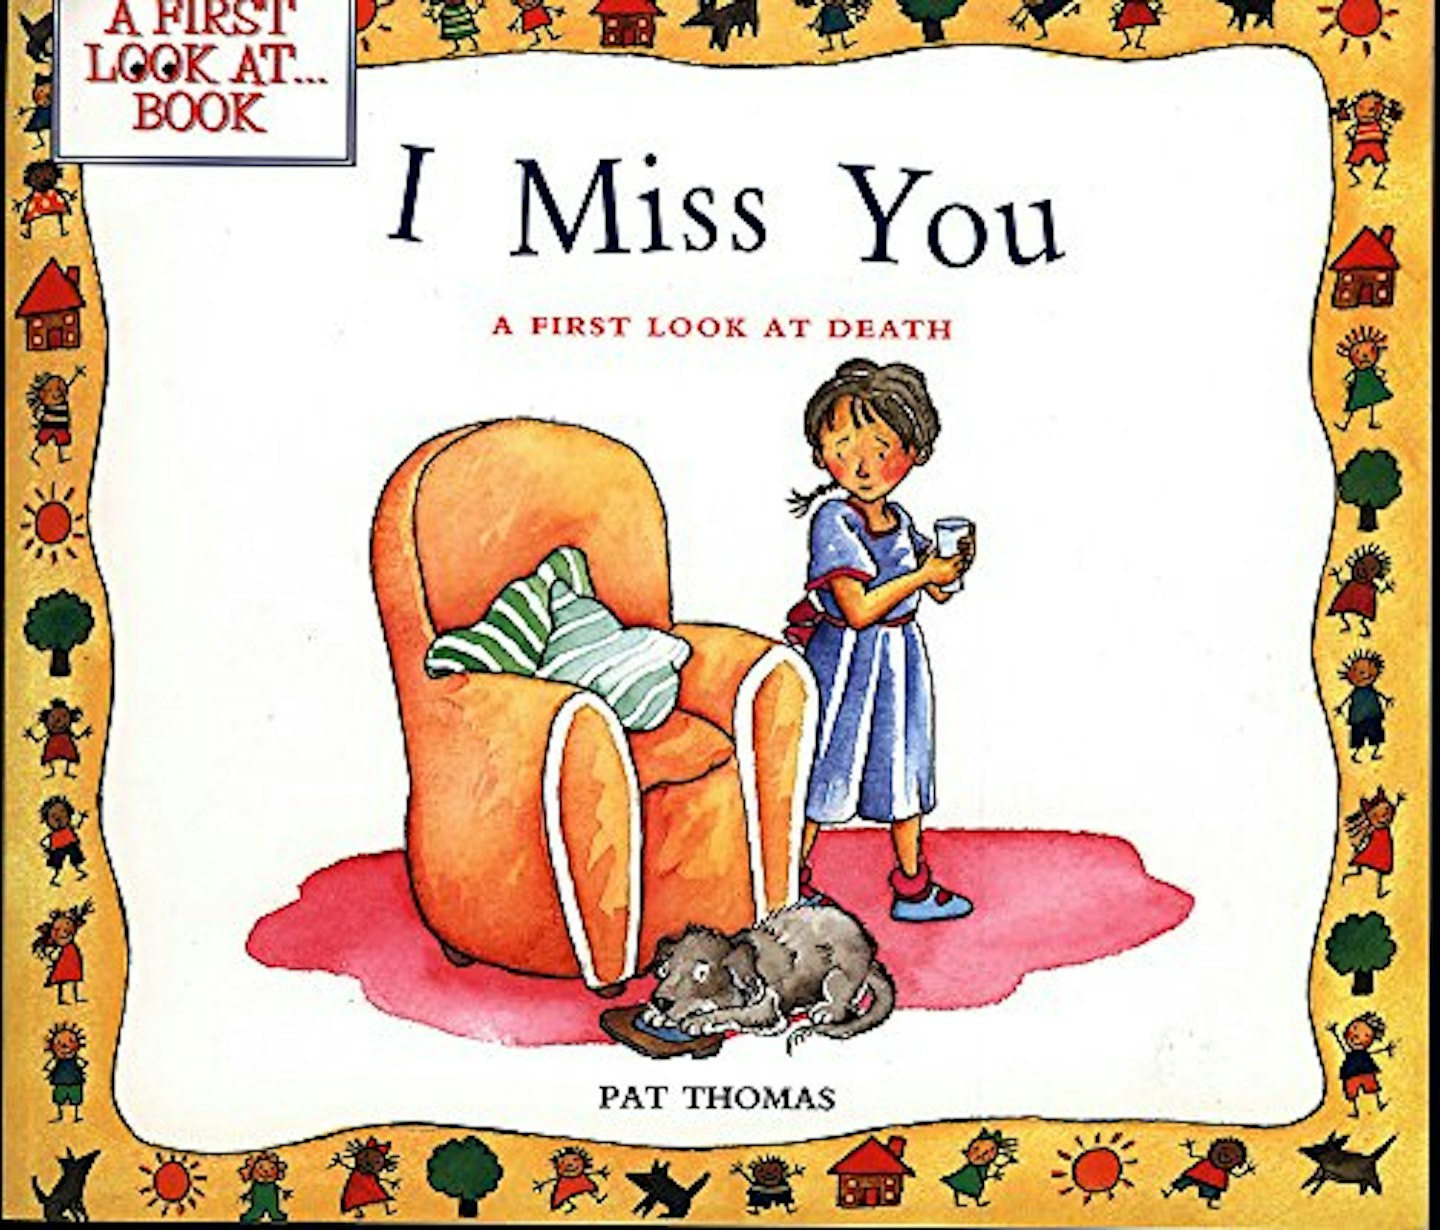  I Miss You: A First Look at Death by Pat Thomas and Lesley Harker